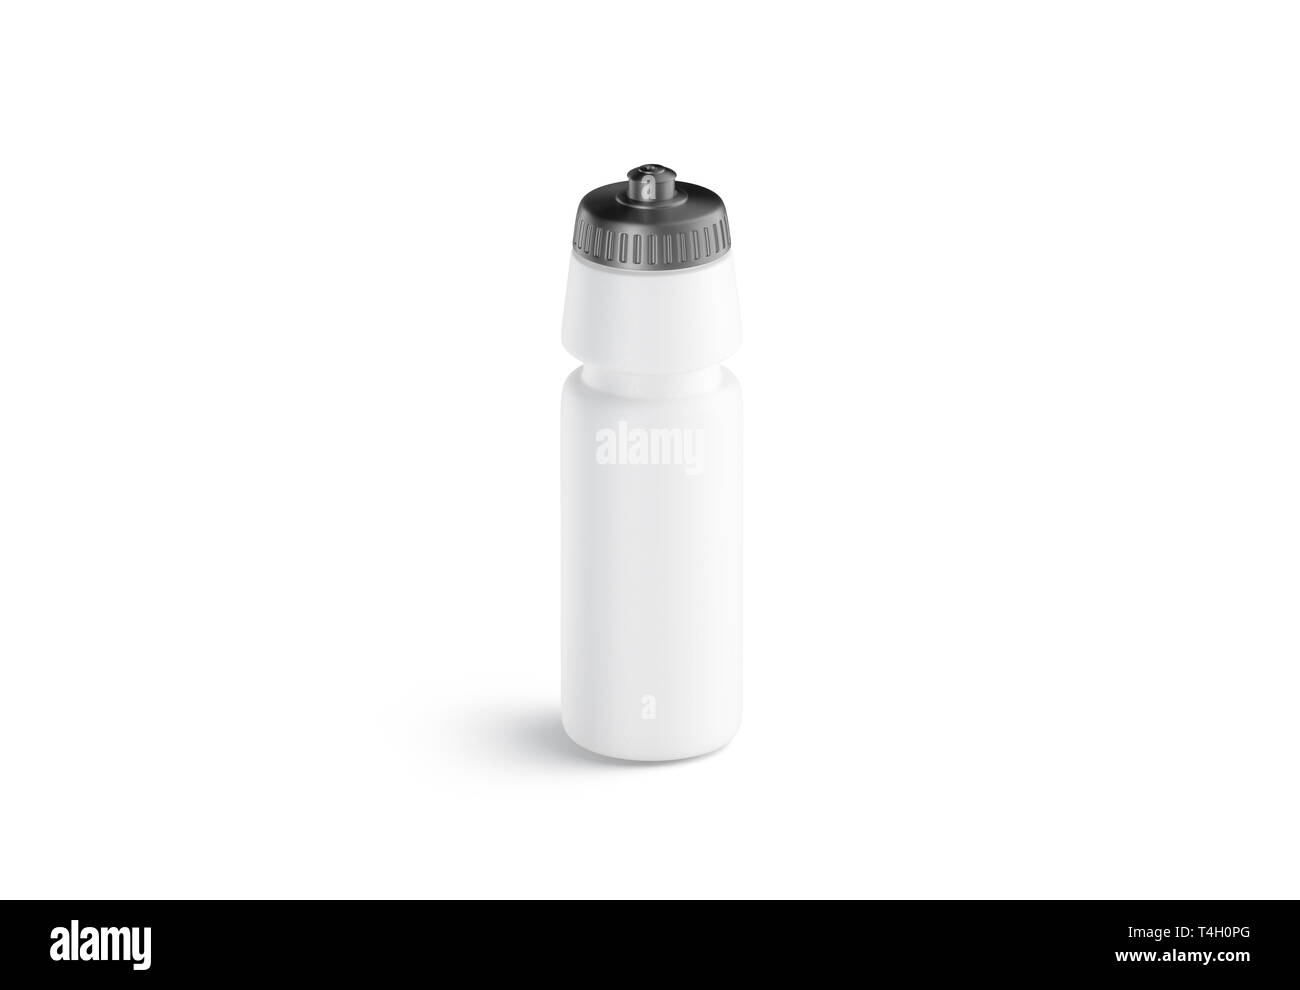 https://c8.alamy.com/comp/T4H0PG/blank-white-plastic-sport-bottle-mock-up-front-view-isolated-3d-rendering-clear-empty-can-with-grey-cap-mockup-white-container-with-liquid-for-fi-T4H0PG.jpg